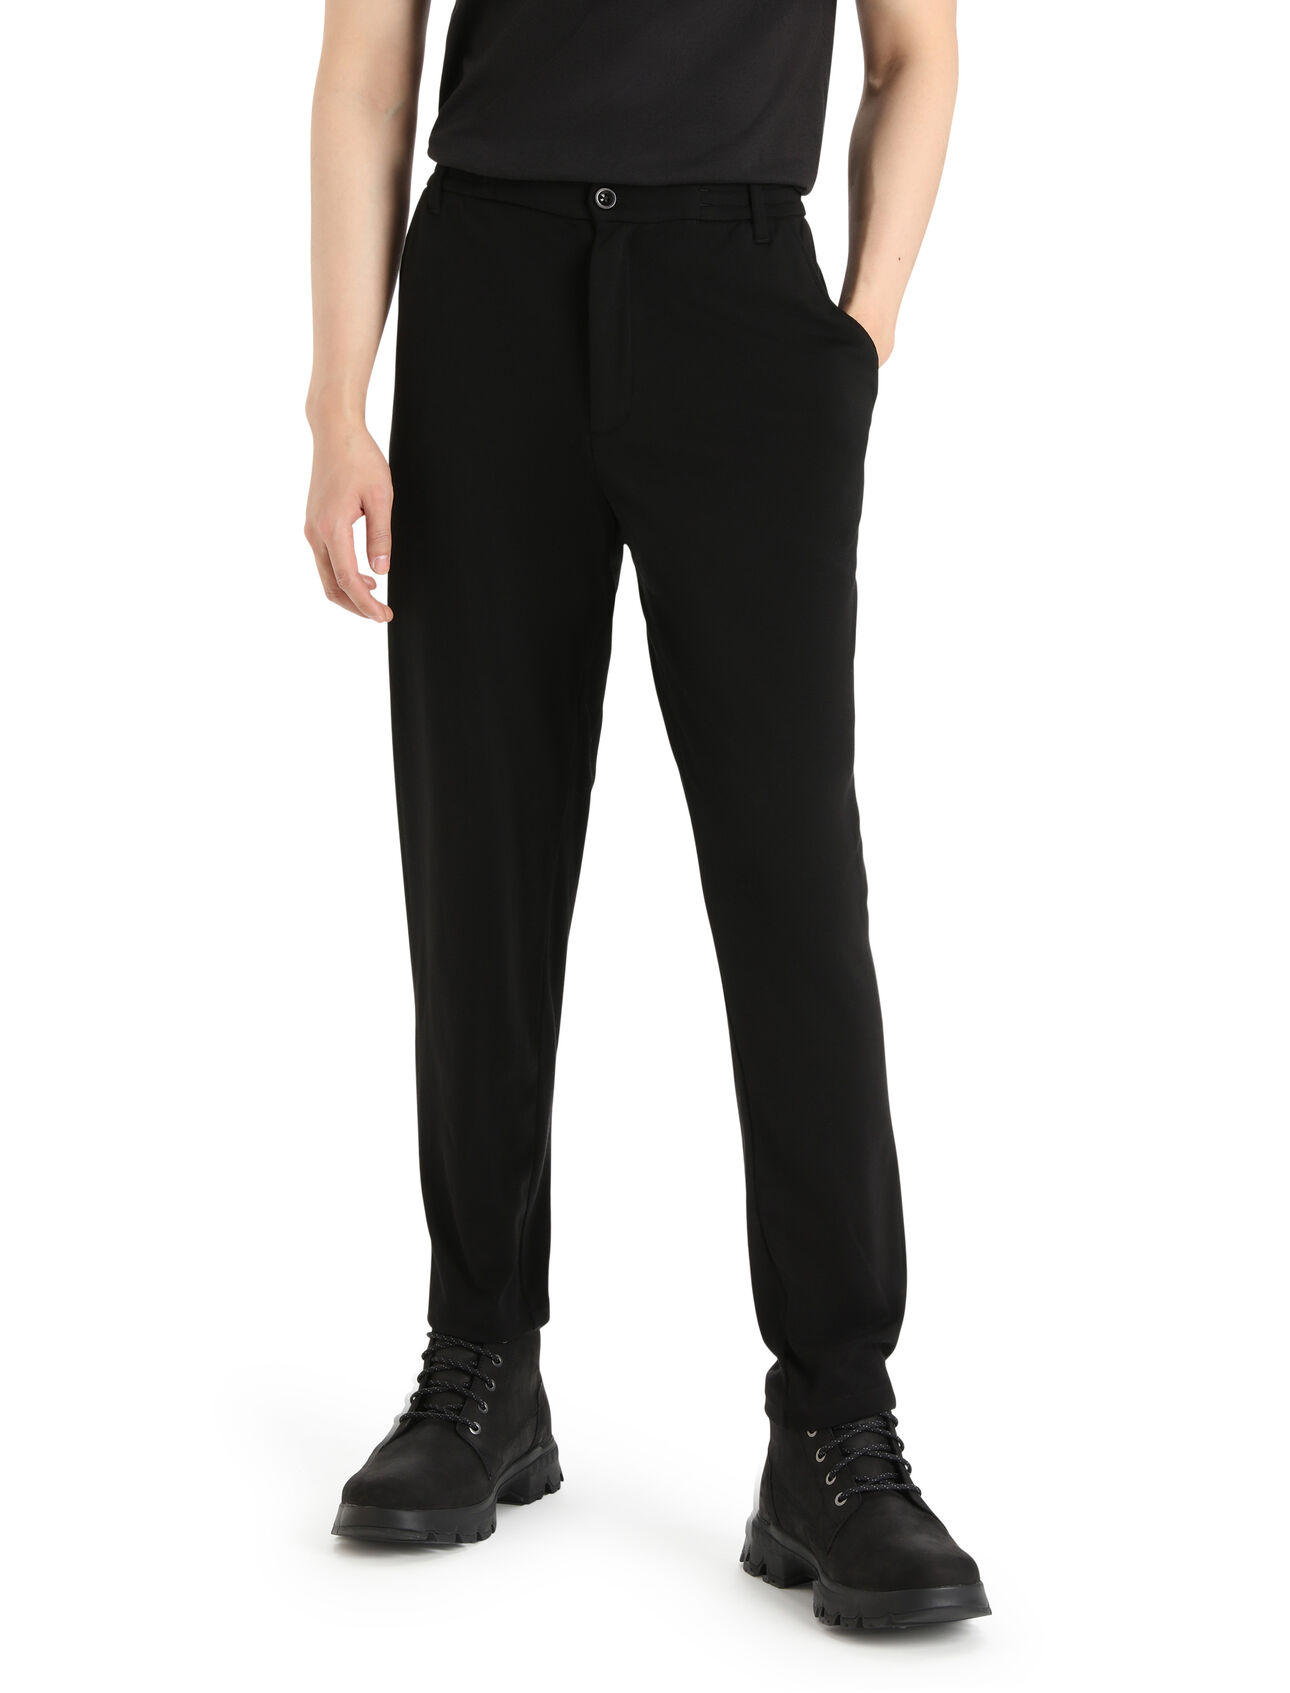 Mens MerinoFine™ Interlock Pants Classic chino-style pants made with luxuriously soft, 15.5 micron 100% pure merino wool fibers, the MerinoFine™ Interlock Pants are naturally comfortable, breathable and odor-resistant.